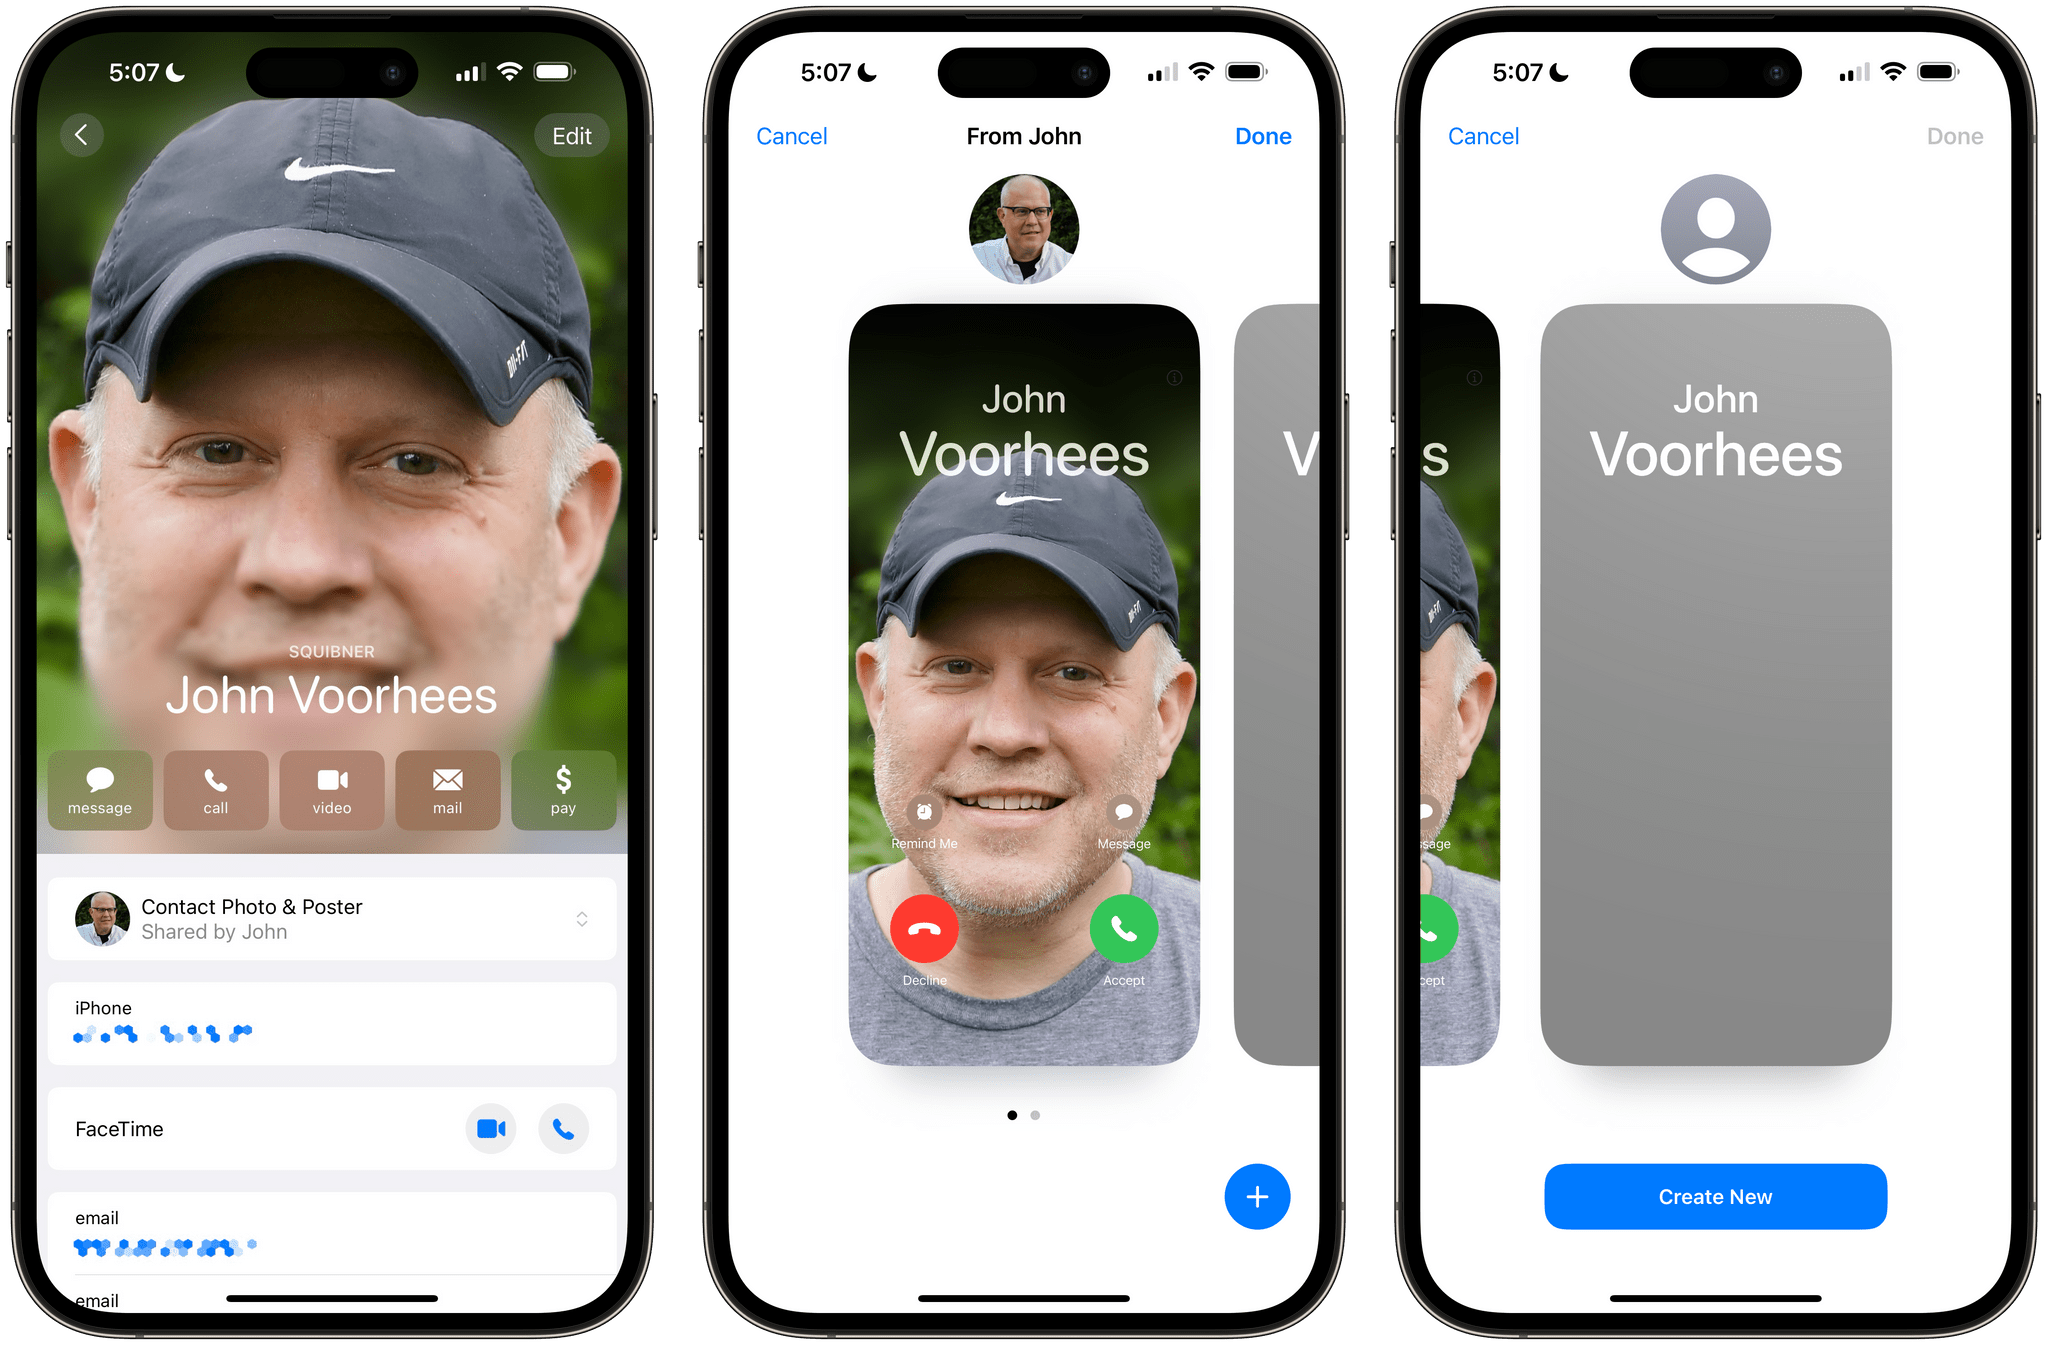 When viewing someone's contact page, you can see the poster they made for themselves, or you can choose to make a new one that will stay on your devices only.